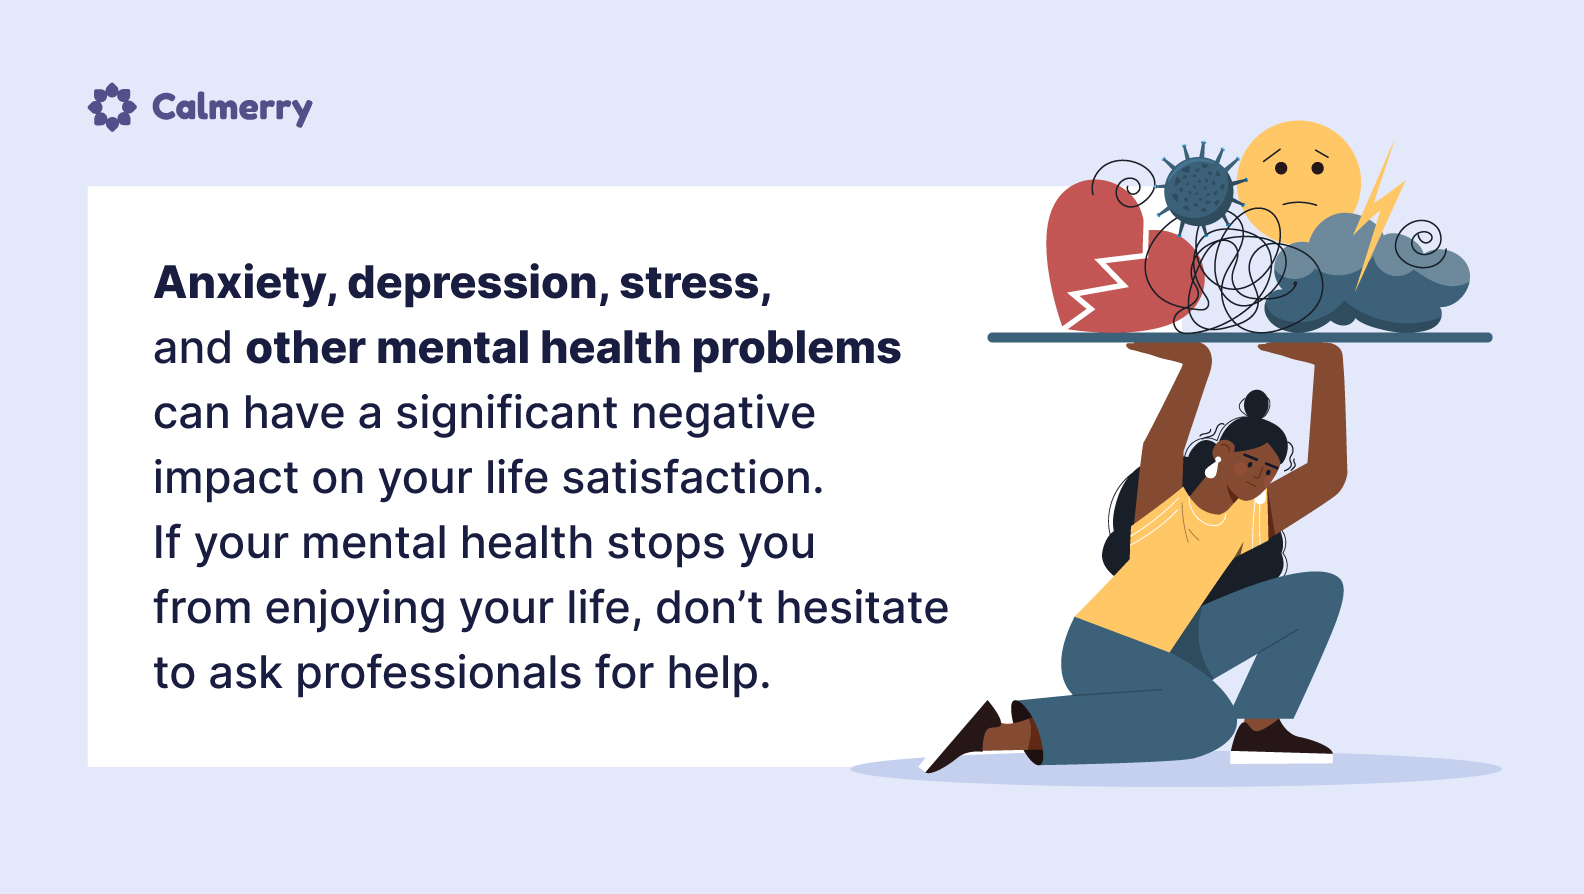 Mental health issues can negatively affect your life satisfaction